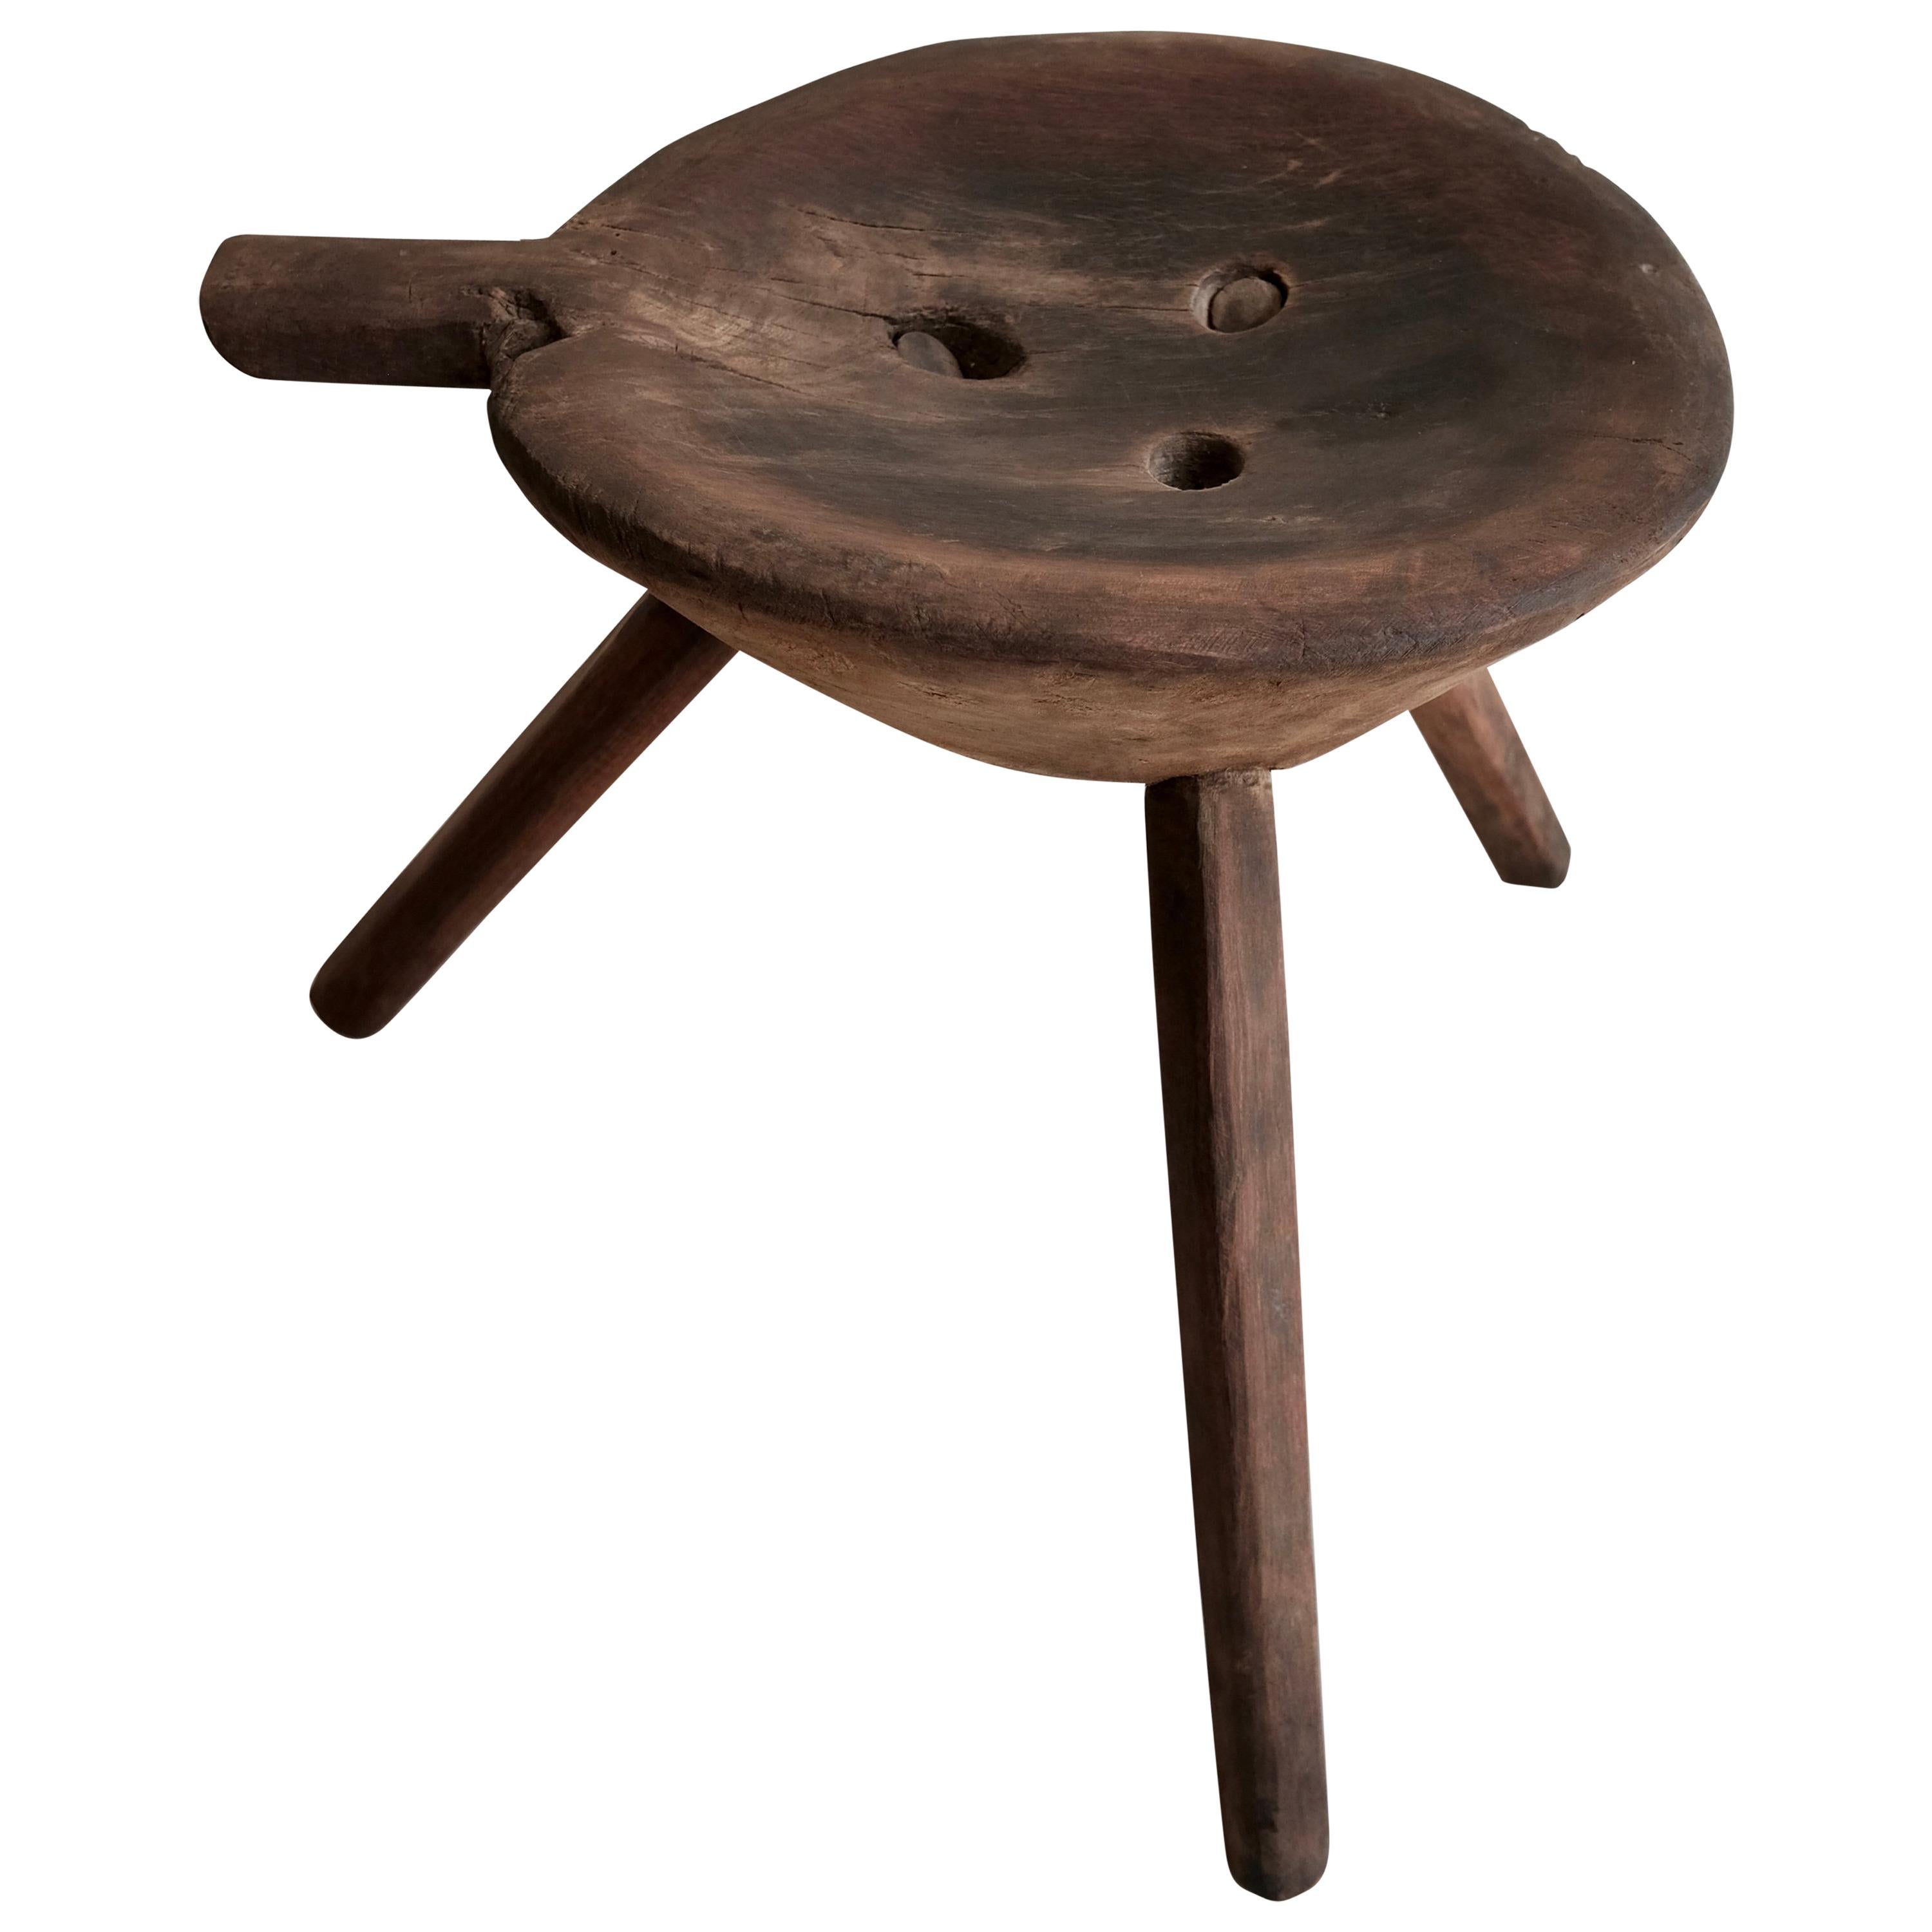 Mesquite Work Stool from Mexico